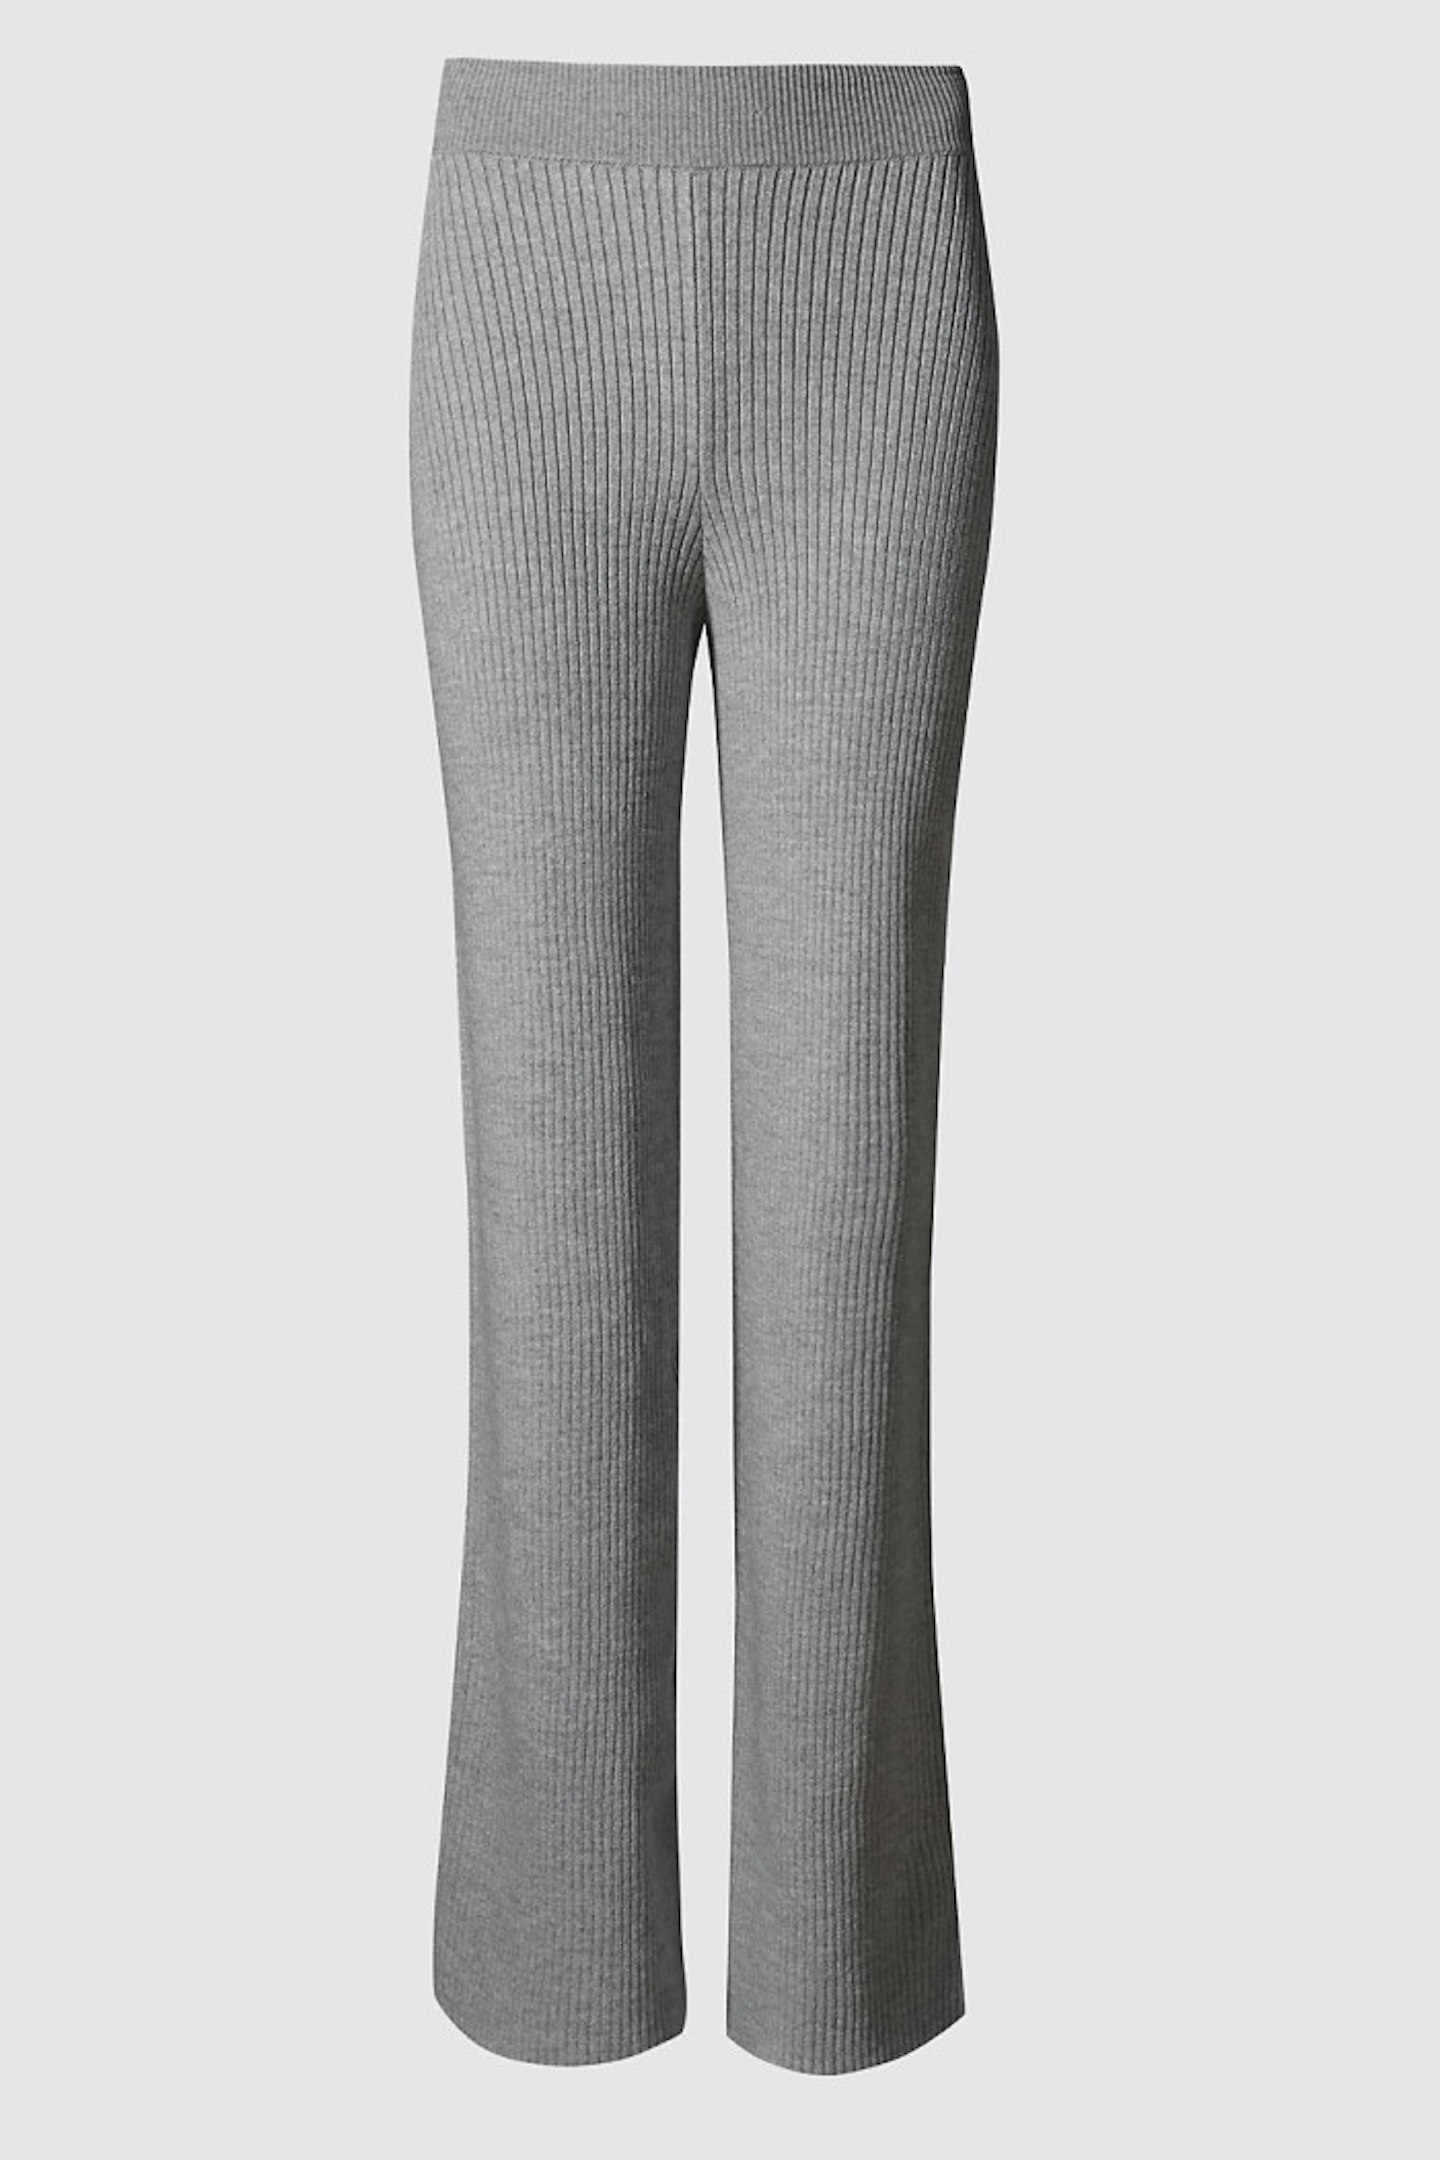 Autograph Wool Trousers, £45.00